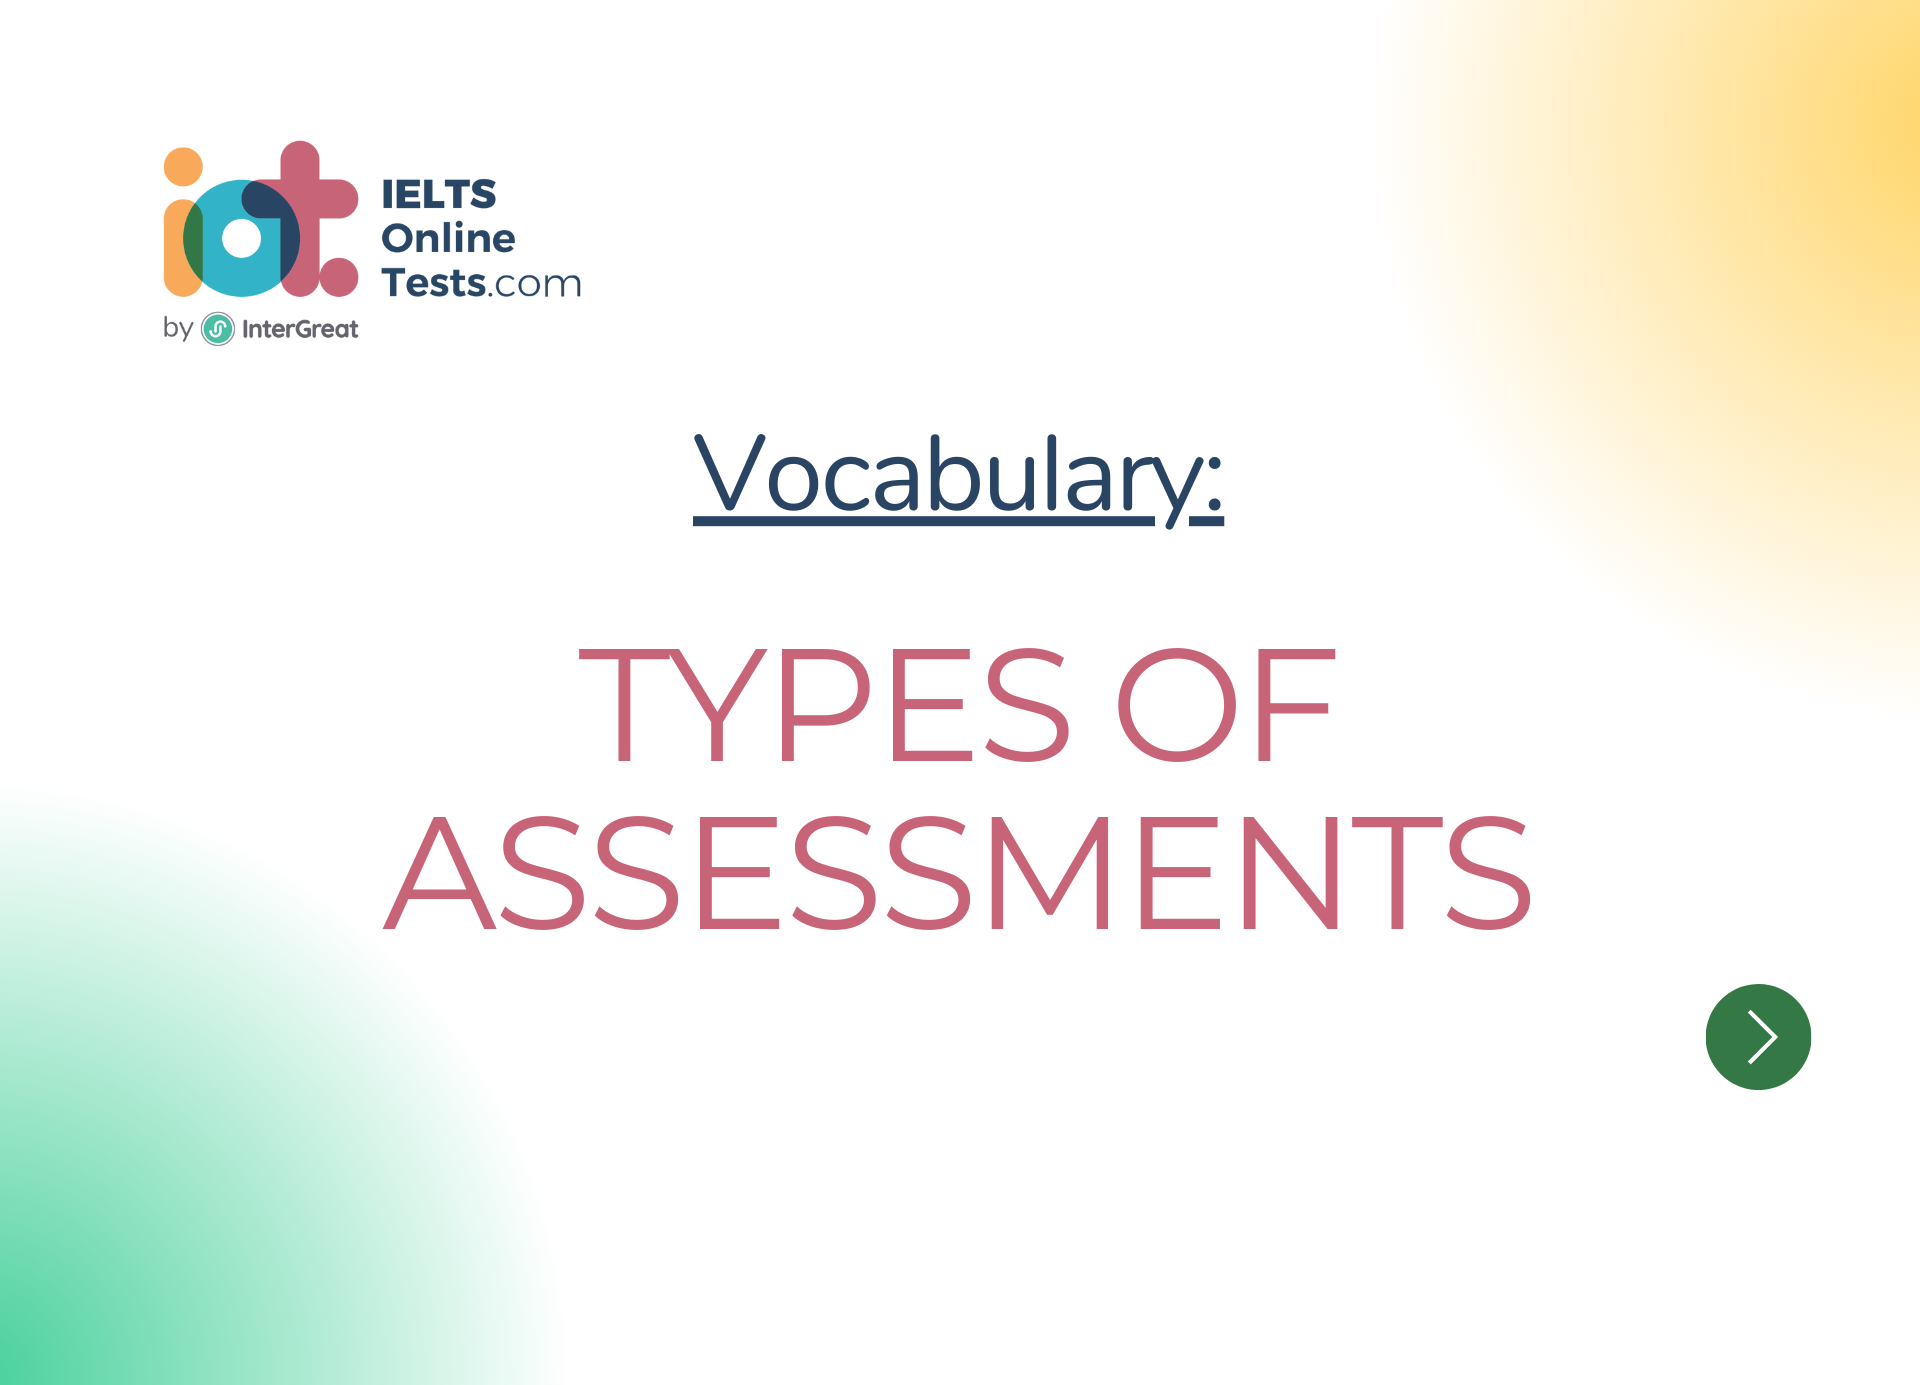 Types of assessments